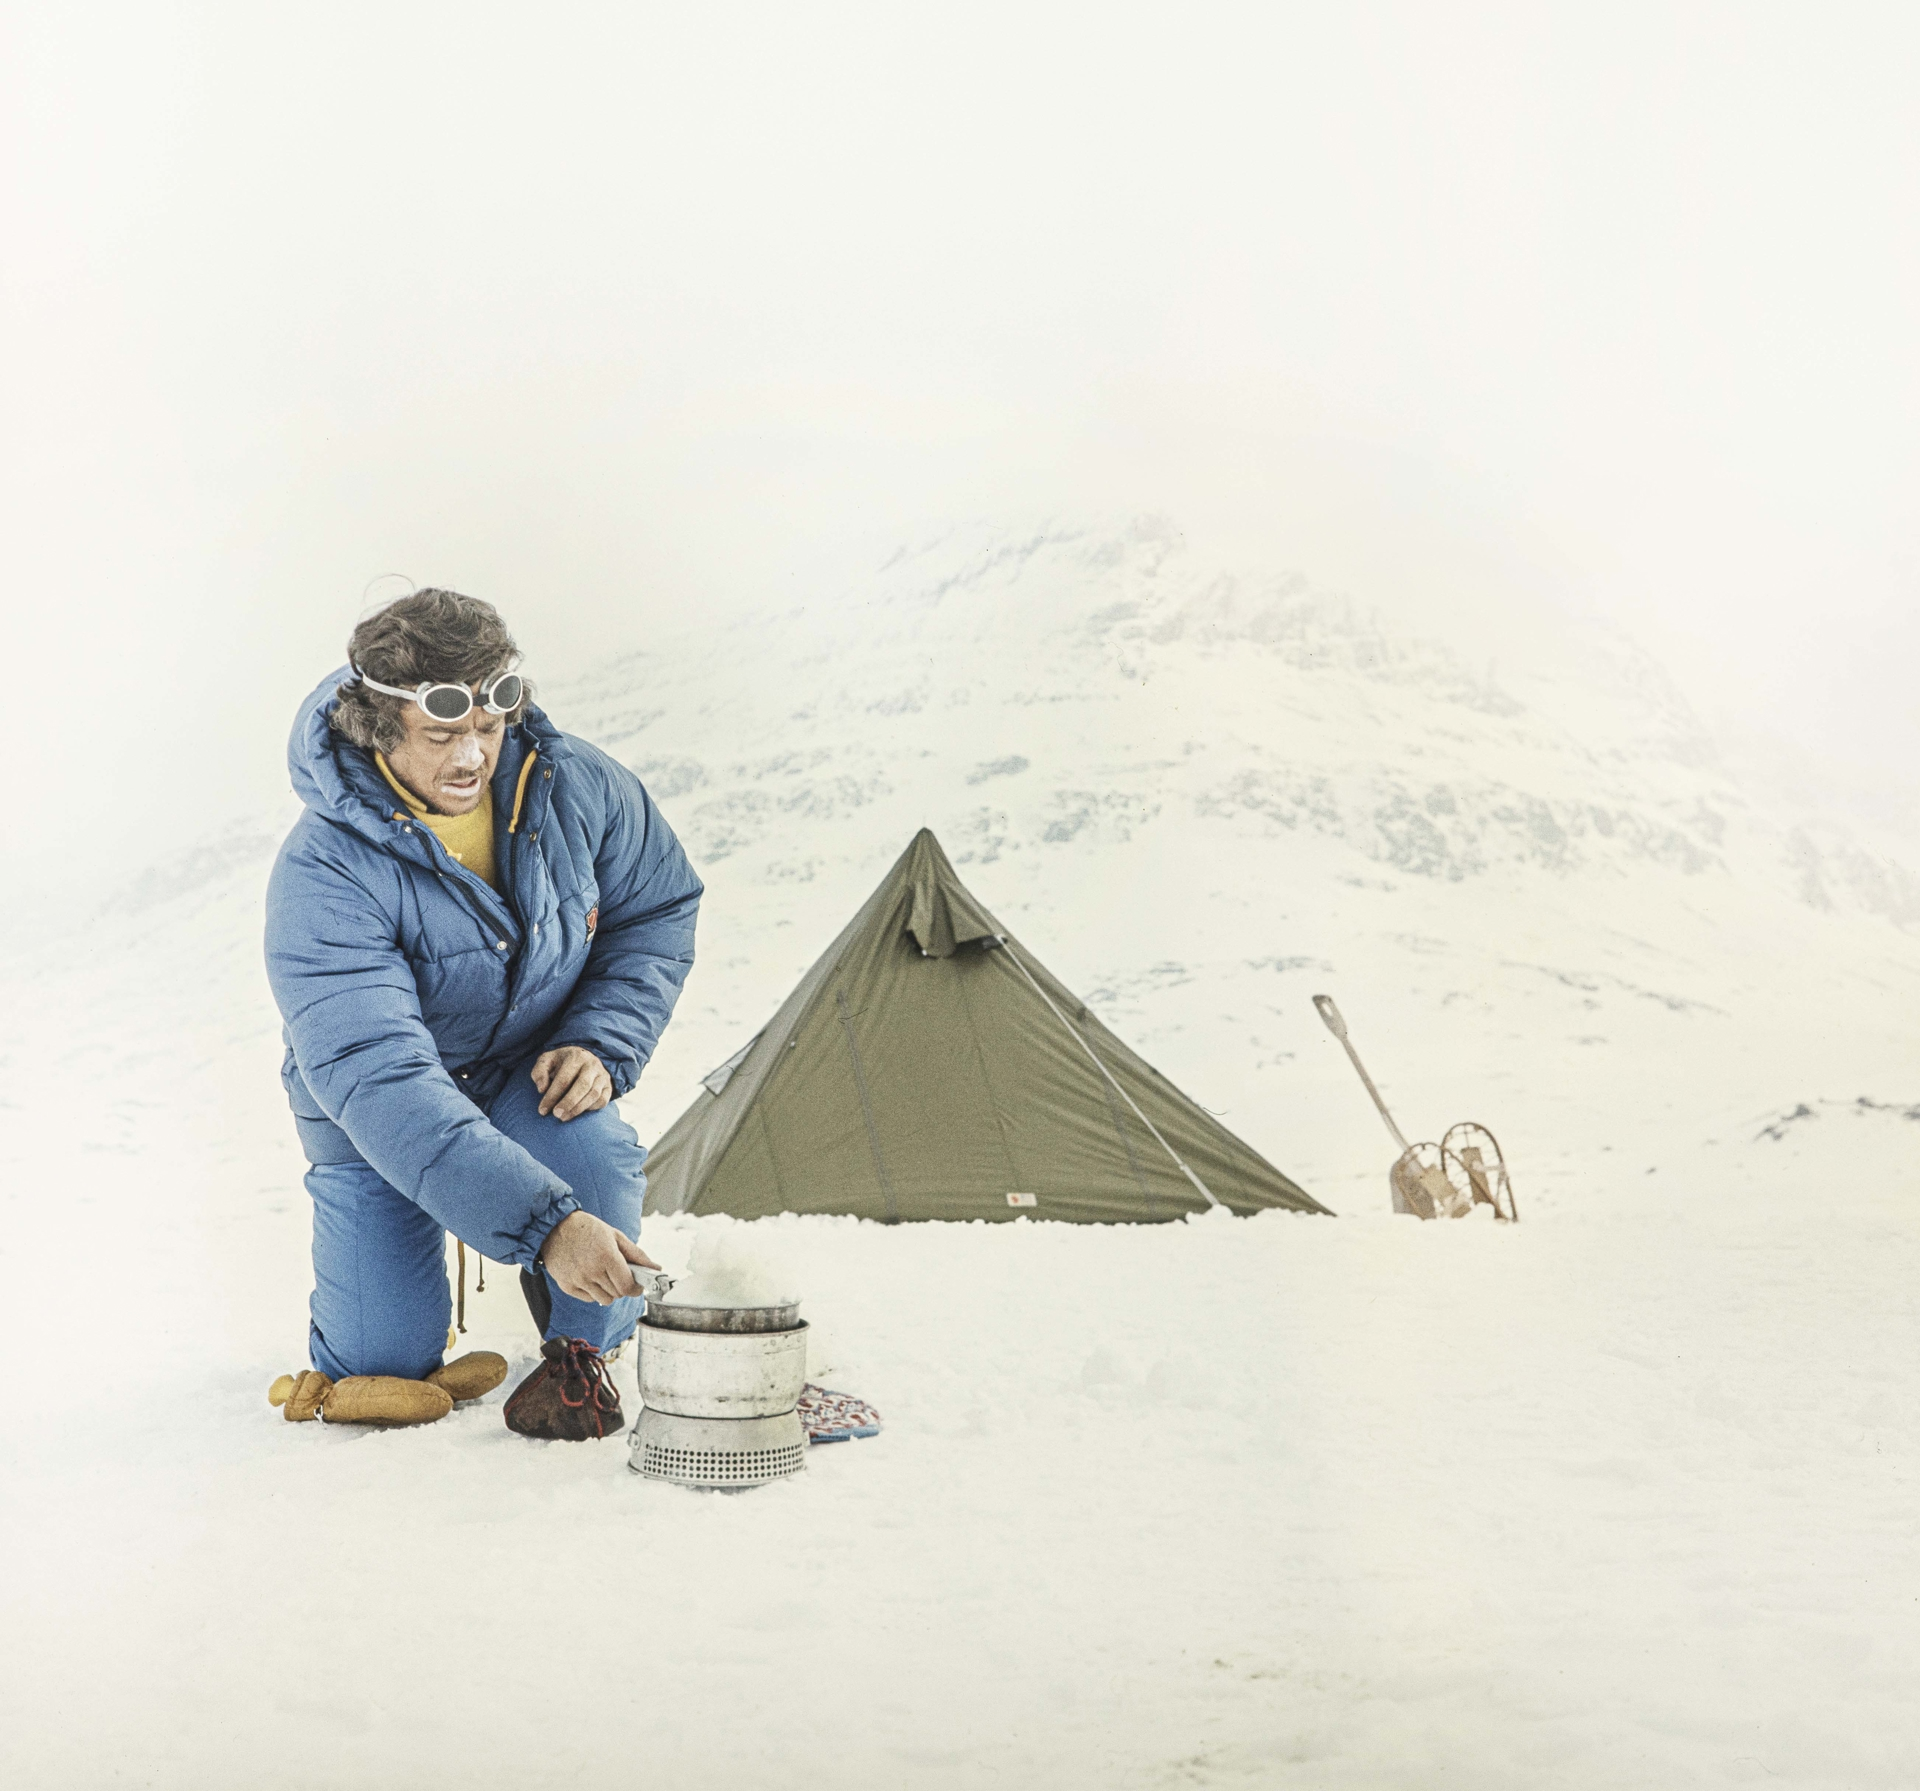 Old picture of man kneeling in blue Fjallraven parka on snow with small green tent in background.